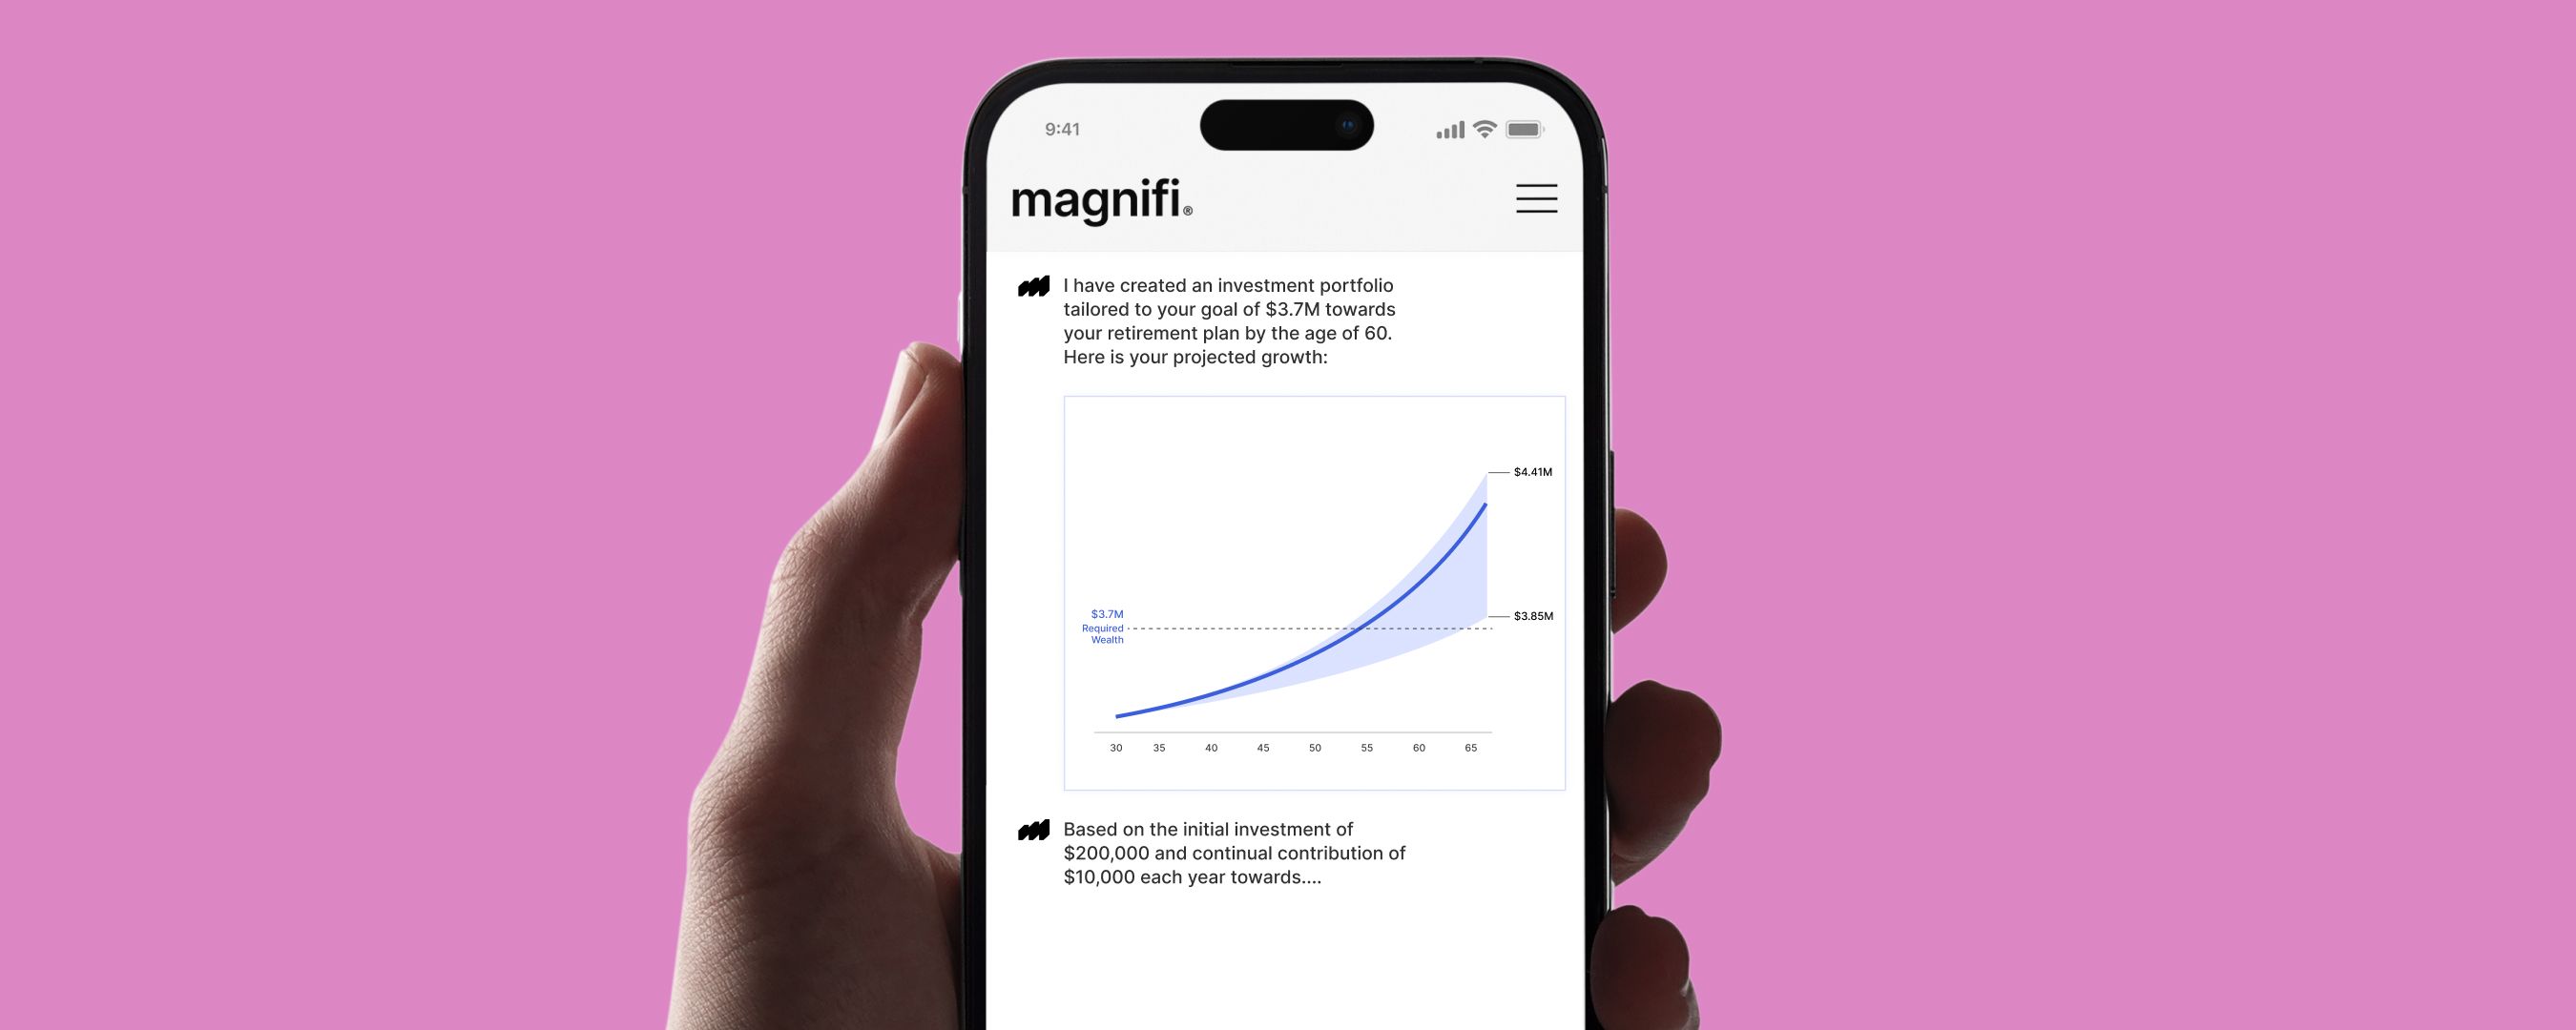 Magnifi app featuring investment growth over time.